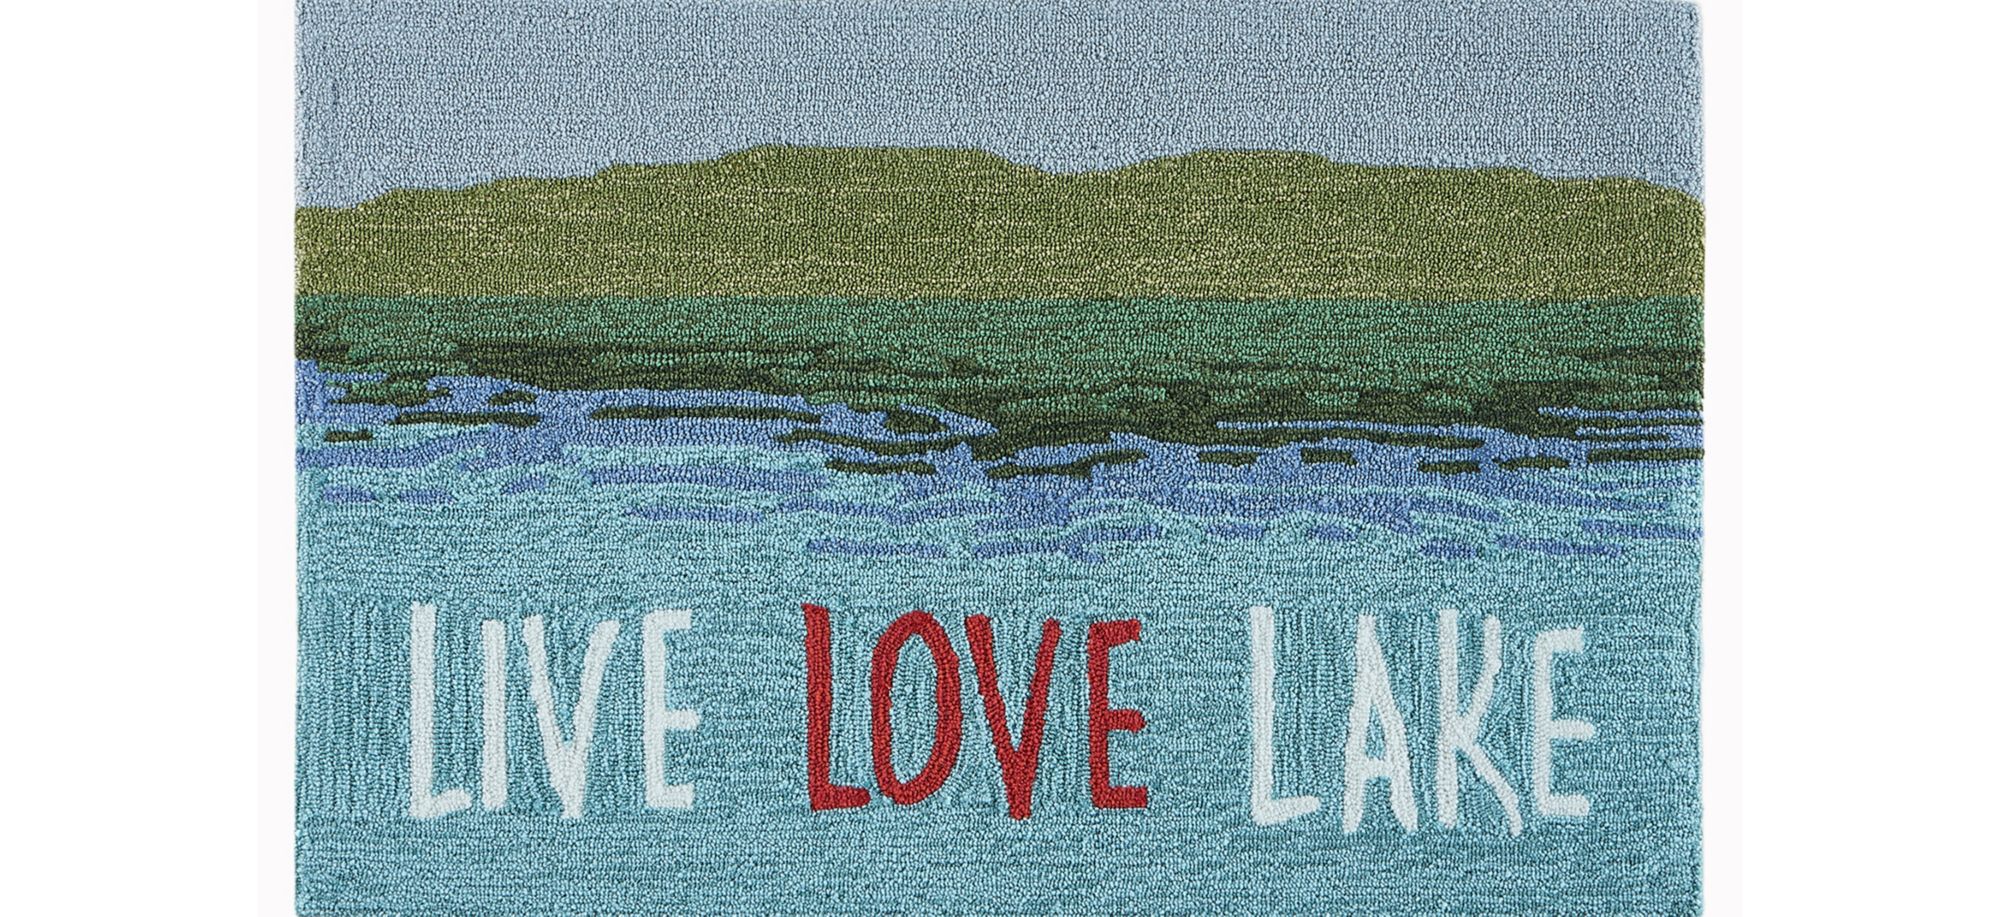 Liora Manne Live Love Lake Front Porch Rug in Water by Trans-Ocean Import Co Inc